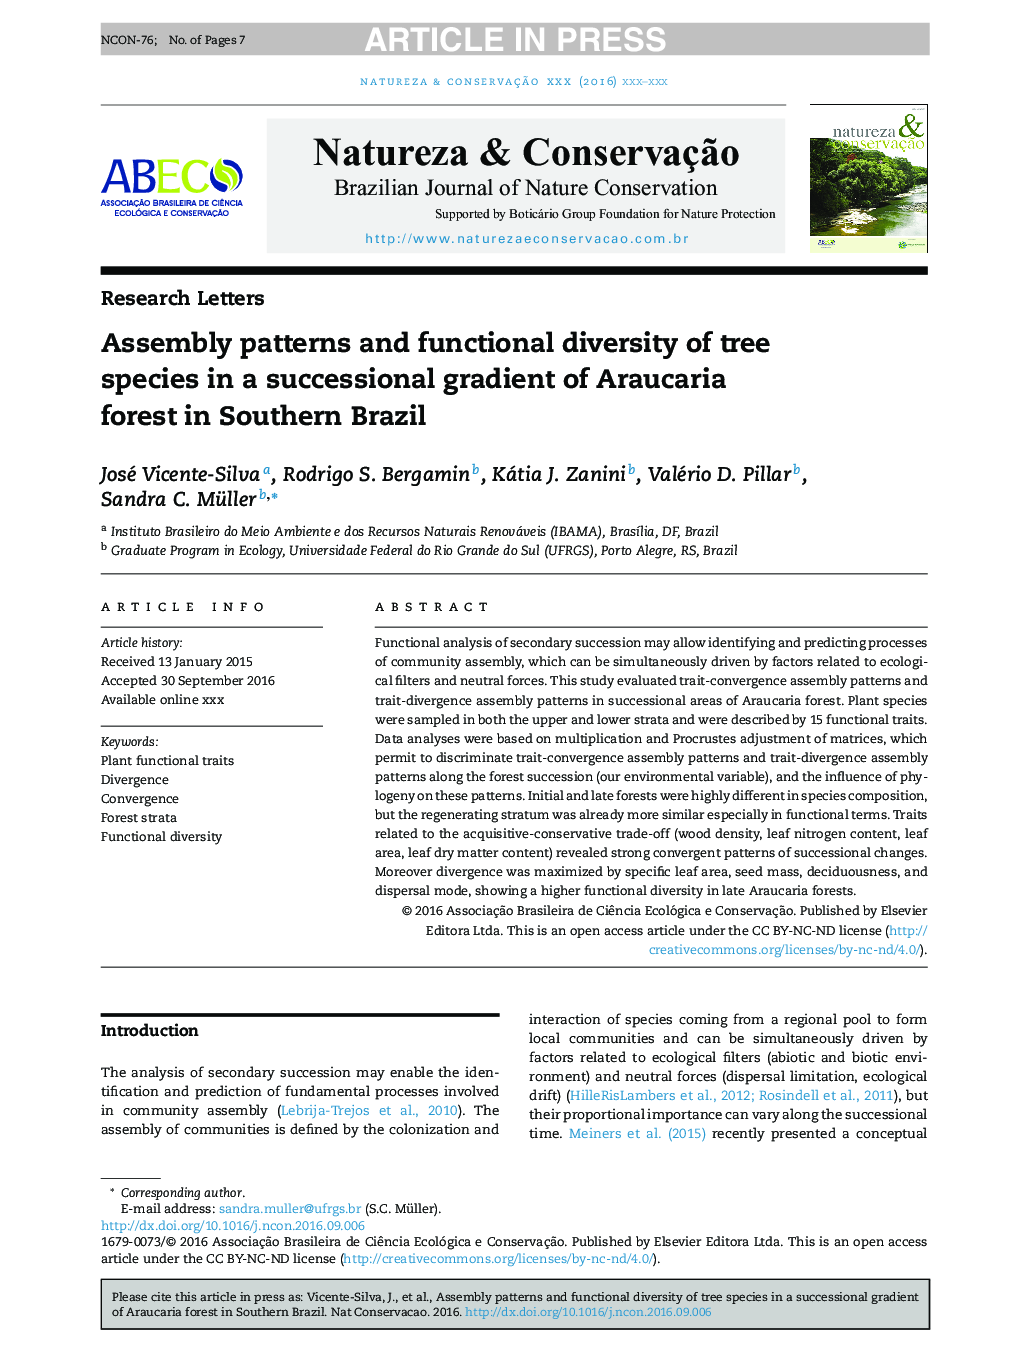 Assembly patterns and functional diversity of tree species in a successional gradient of Araucaria forest in Southern Brazil